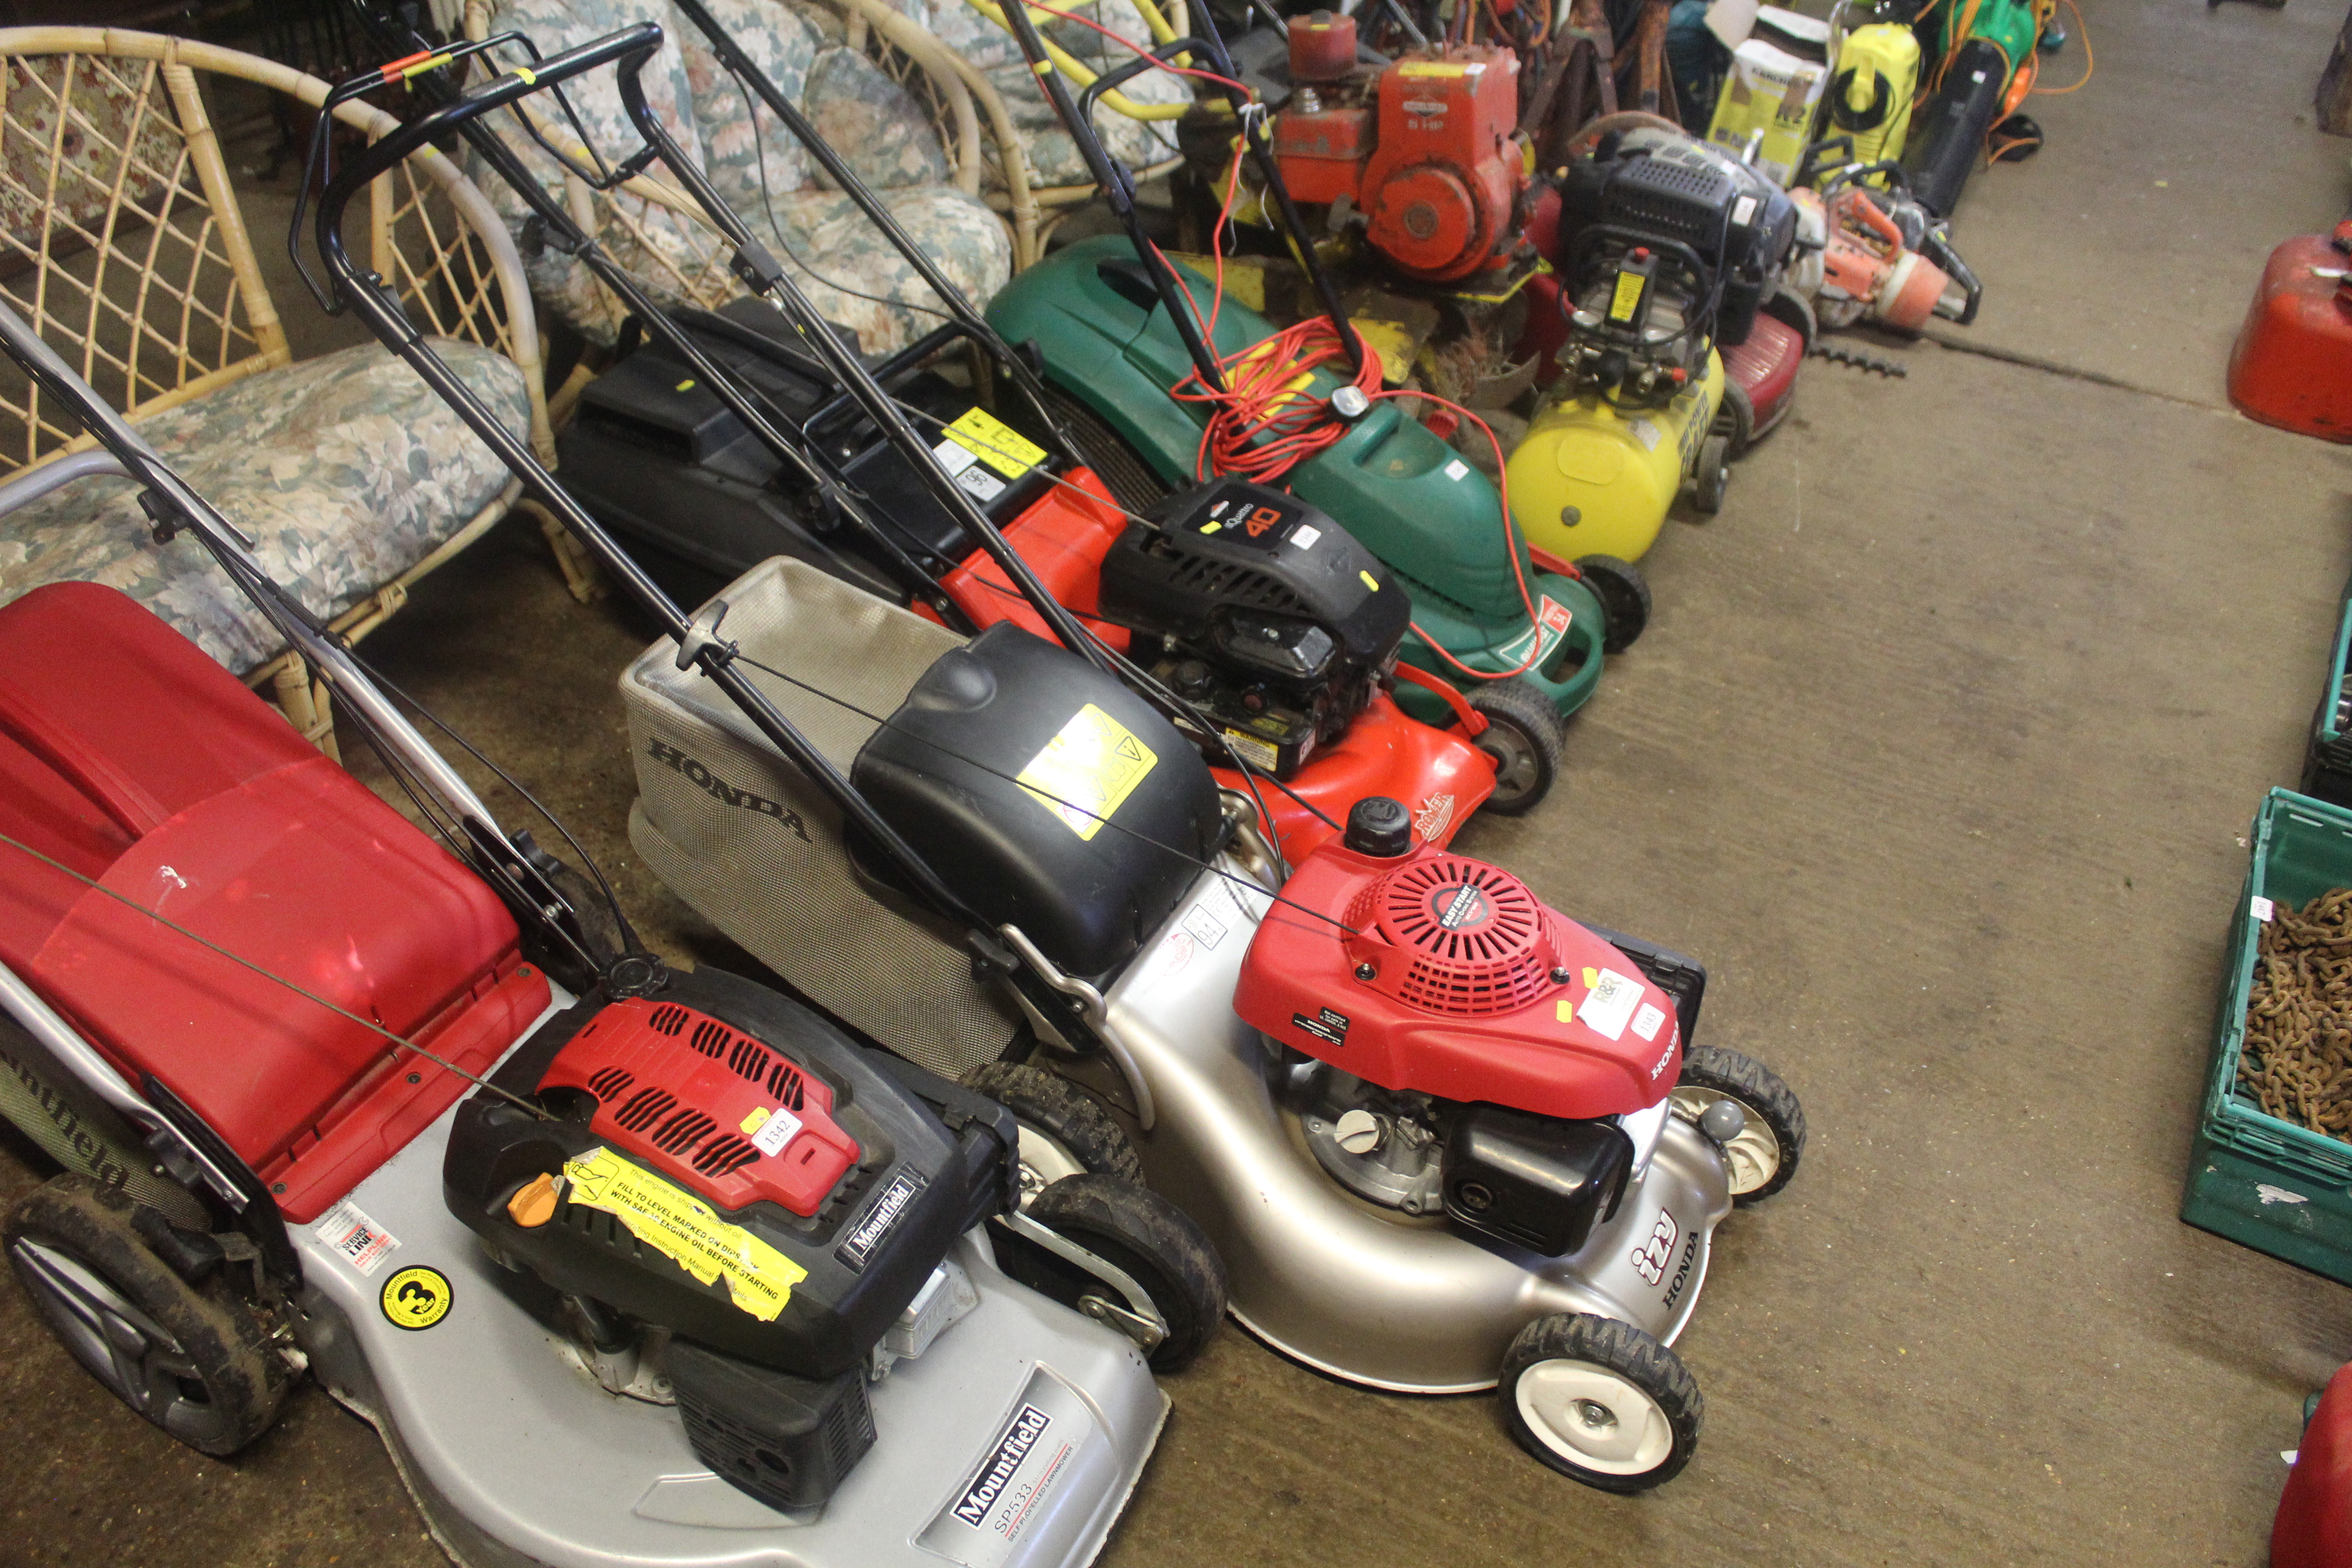 A Honda Izy self-propelled rotary lawn mower with